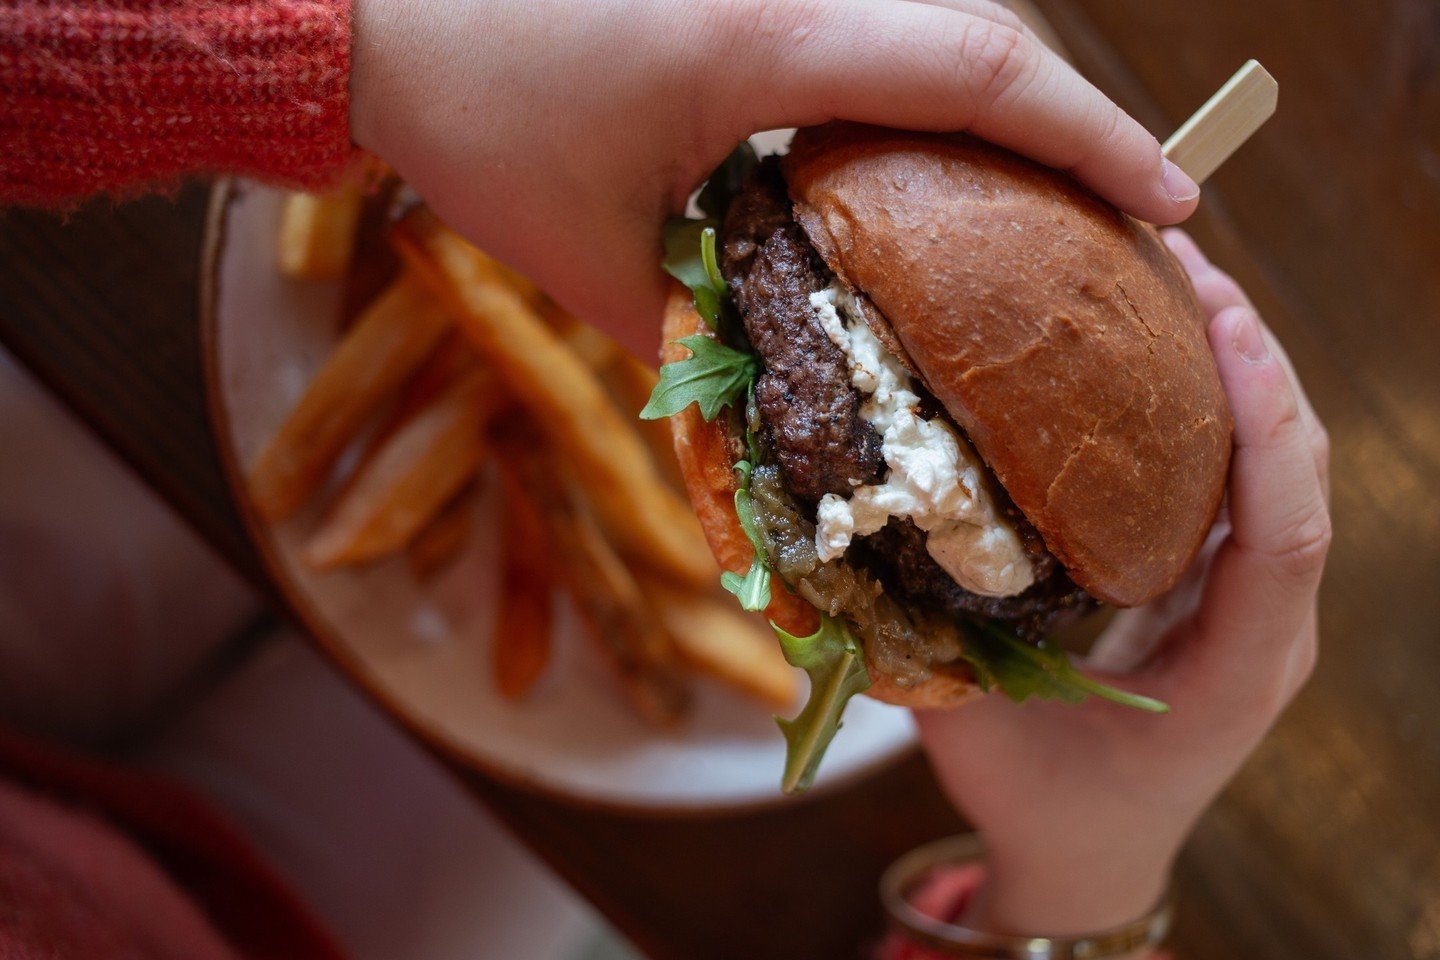 The Fig and Fromage Burger has only a few days left on our menu! ⁠
⁠
Enjoy the black pepper crusted patty, fig jam, caramelized onions, fresh arugula, and LaClare Family Creamery goat cheese before it's gone 😋